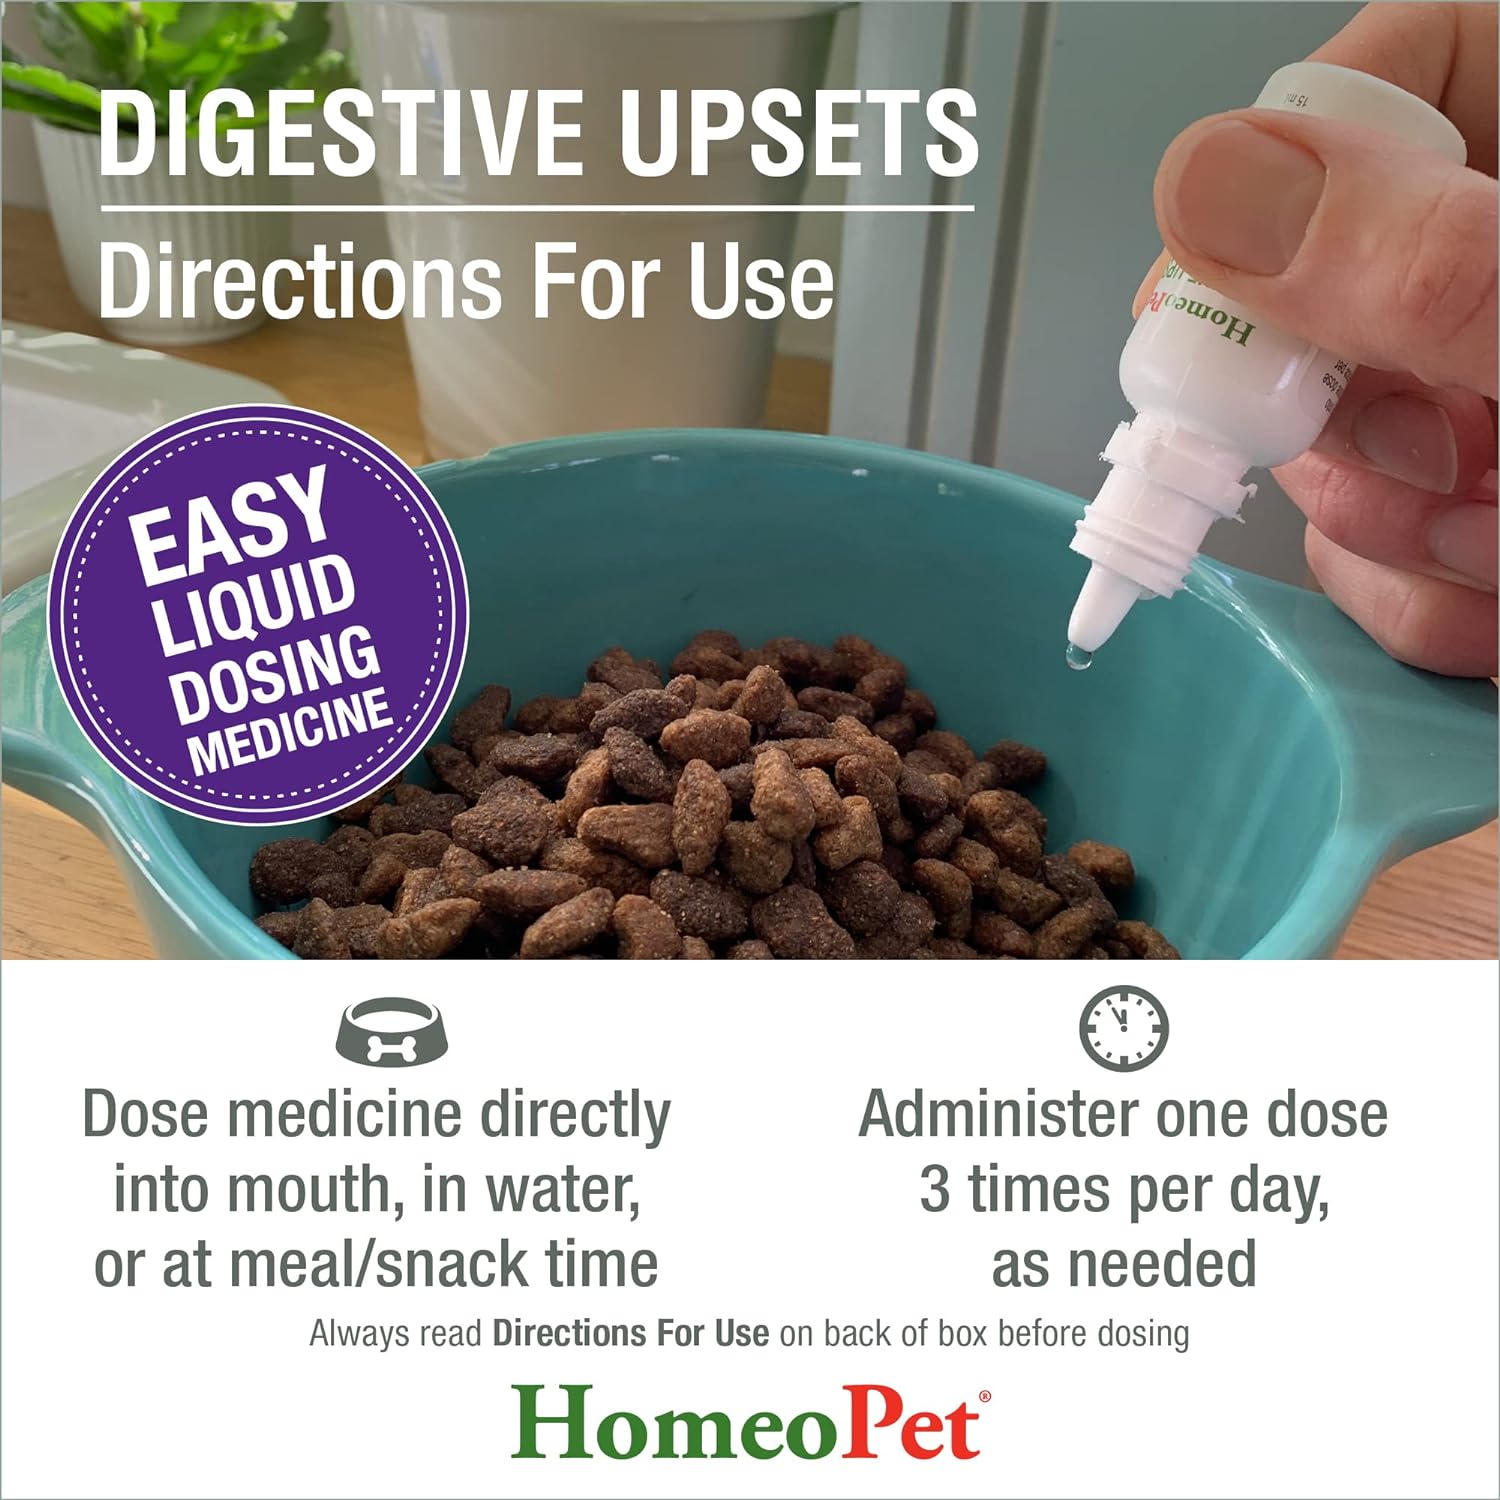 HomeoPet Digestive Upsets Natural Pet Digestive Support, Supports Temporary Relief from Digestive Problems, 15 Milliliters : Pet Digestive Remedies : Pet Supplies